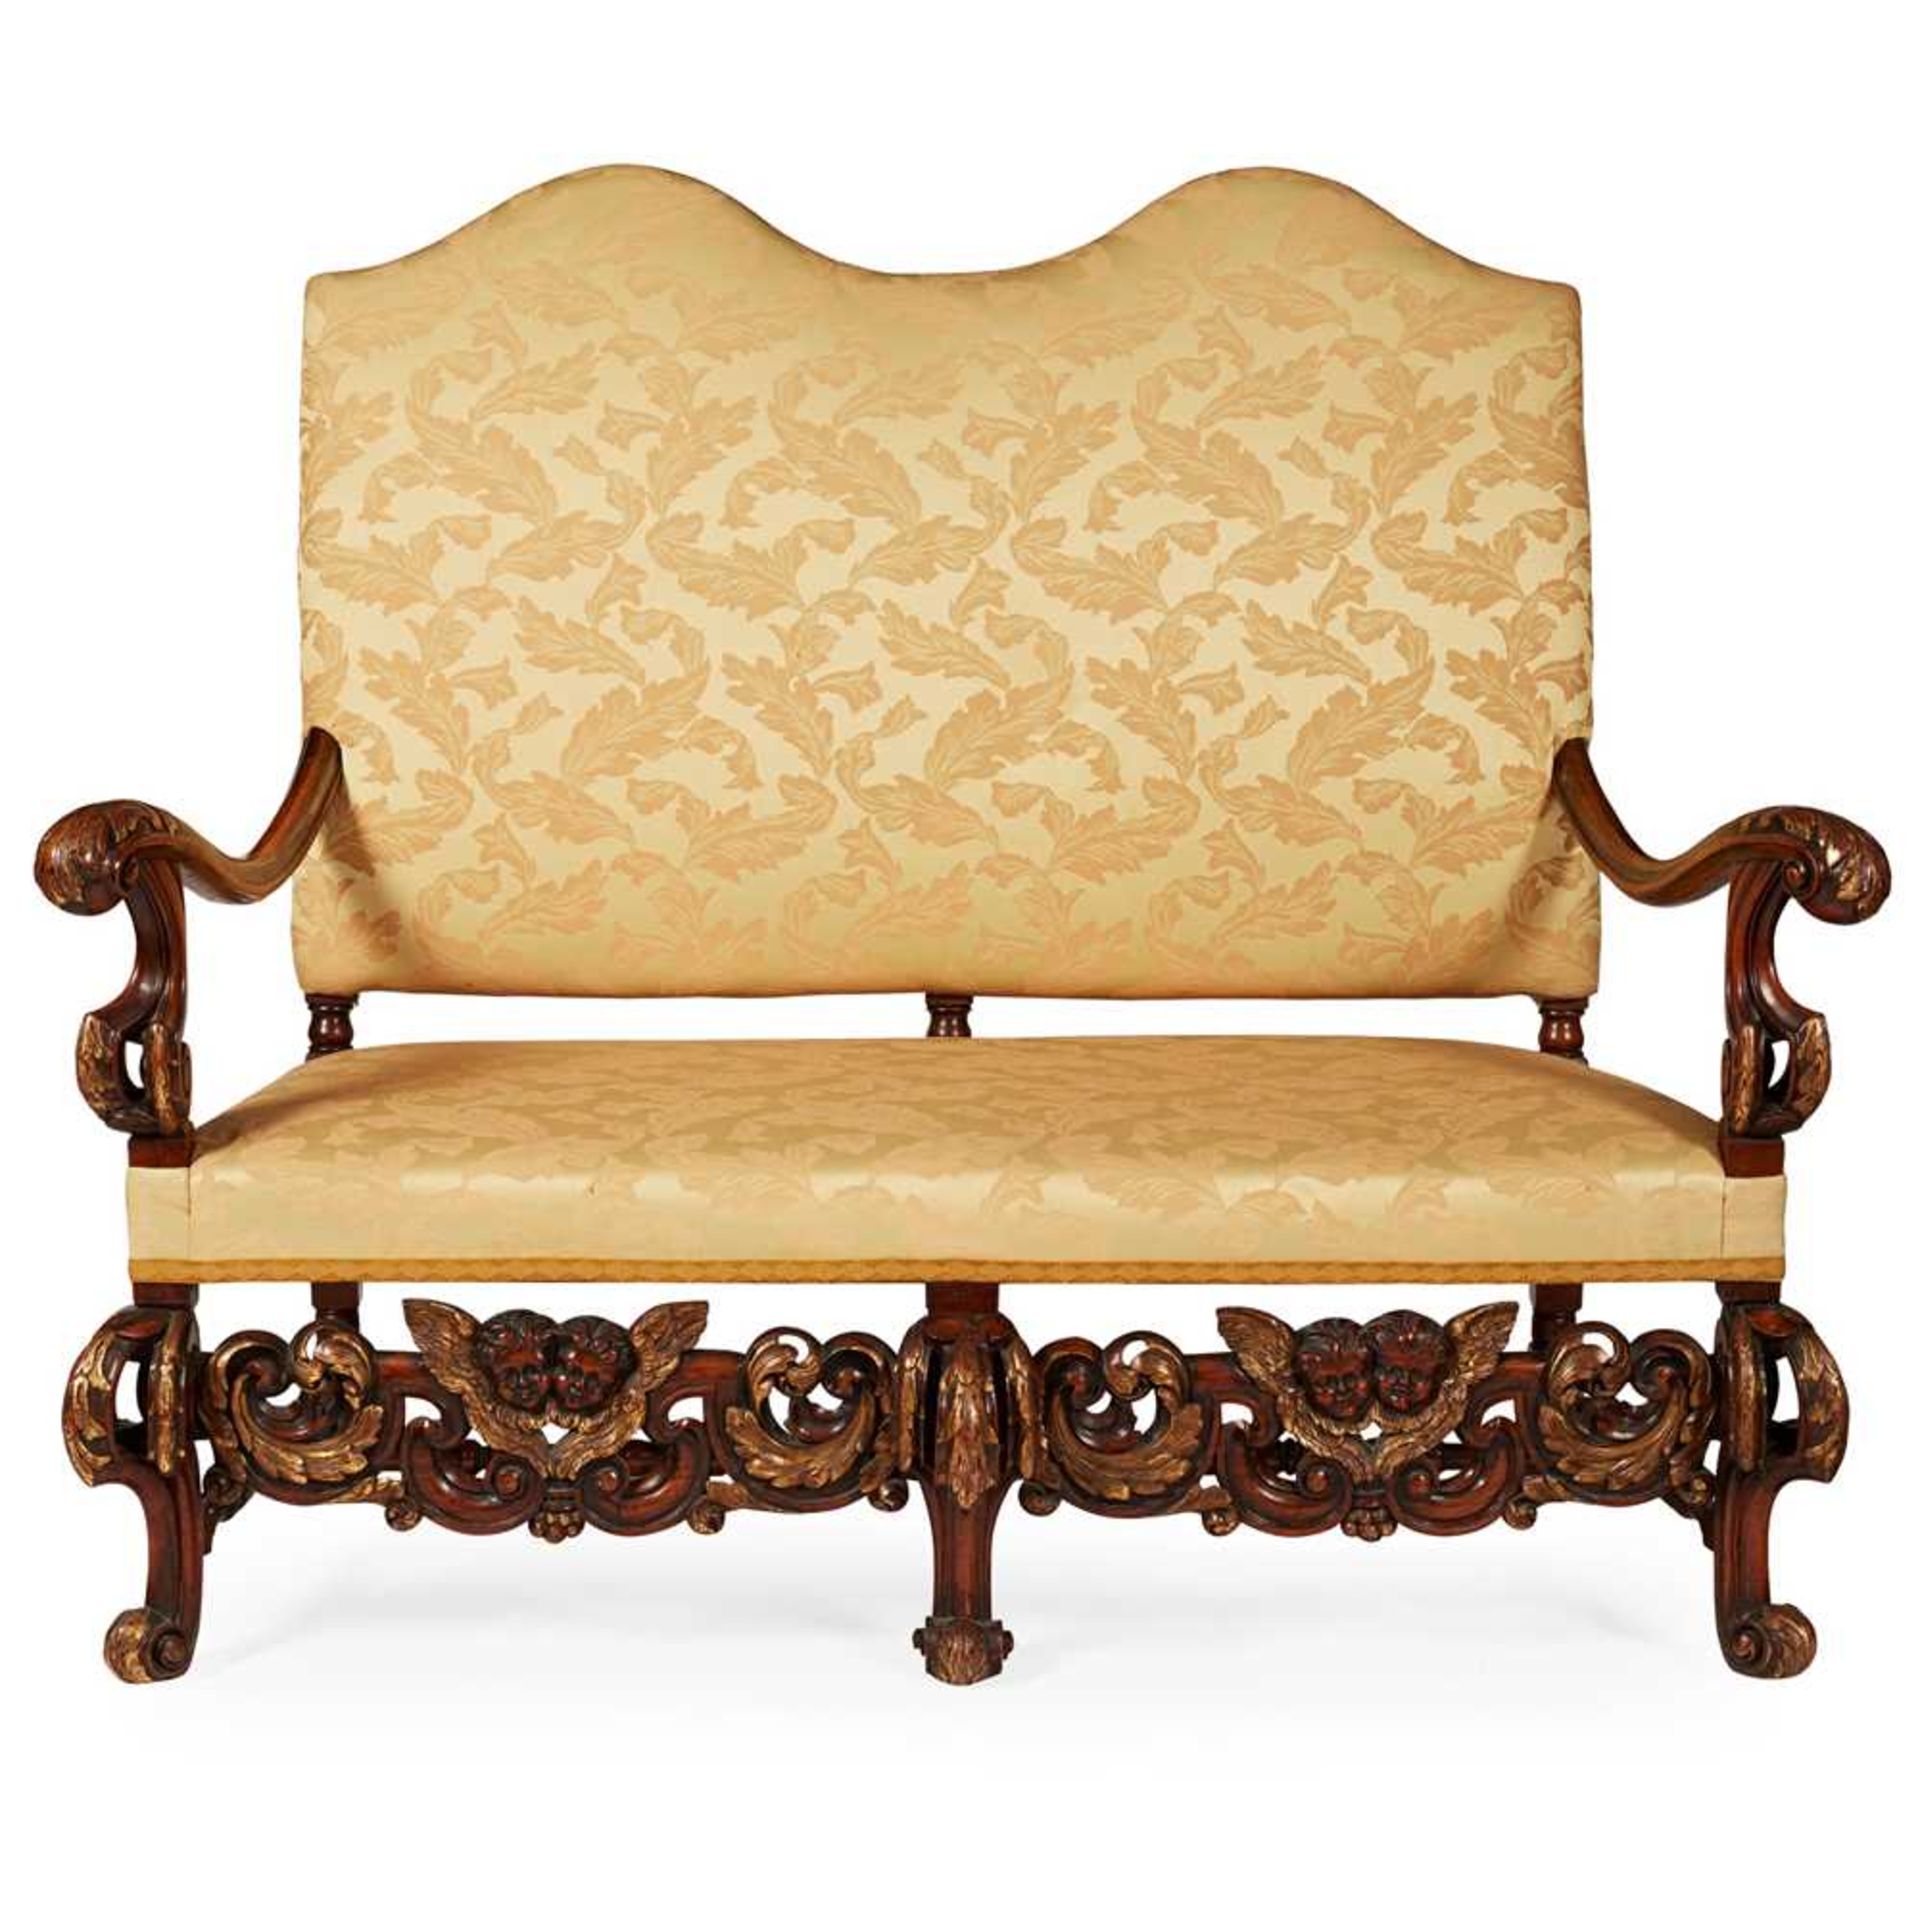 WILLIAM AND MARY STYLE PARCEL-GILT WALNUT DOUBLE CHAIRBACK SETTEE LATE 19TH/ EARLY 20TH CENTURY